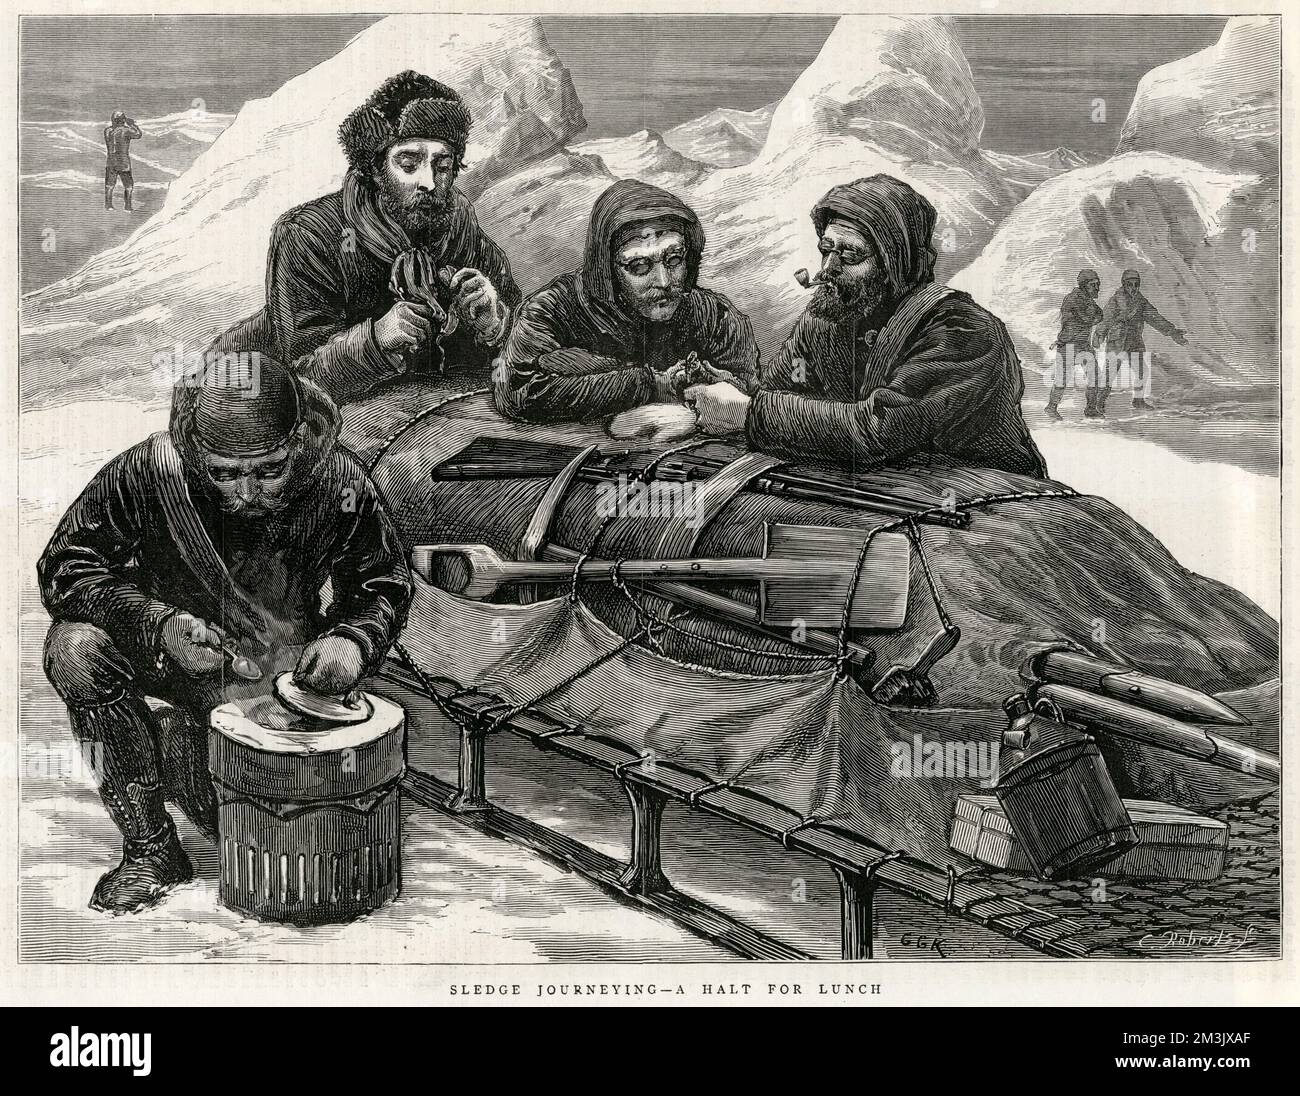 A sledging party of the British Arctic Expedition, 1875-1876, preparing to have their lunch.  In the foreground can be seen their sledge with various equipment attached, including a gun, a pick-axe, a spade and several boat-hooks.    In the summer of 1875 the British Admiralty sent Captain George Nares with two ships, HMS 'Alert' and HMS 'Discovery', to make an attempt to reach the North Pole via Smith Sound.      Although the attempt was unsuccessful, a new 'furthest North' record was set, the coasts of Greenland and Ellesmere Island were charted and much scientific data gathered.  1876 Stock Photo